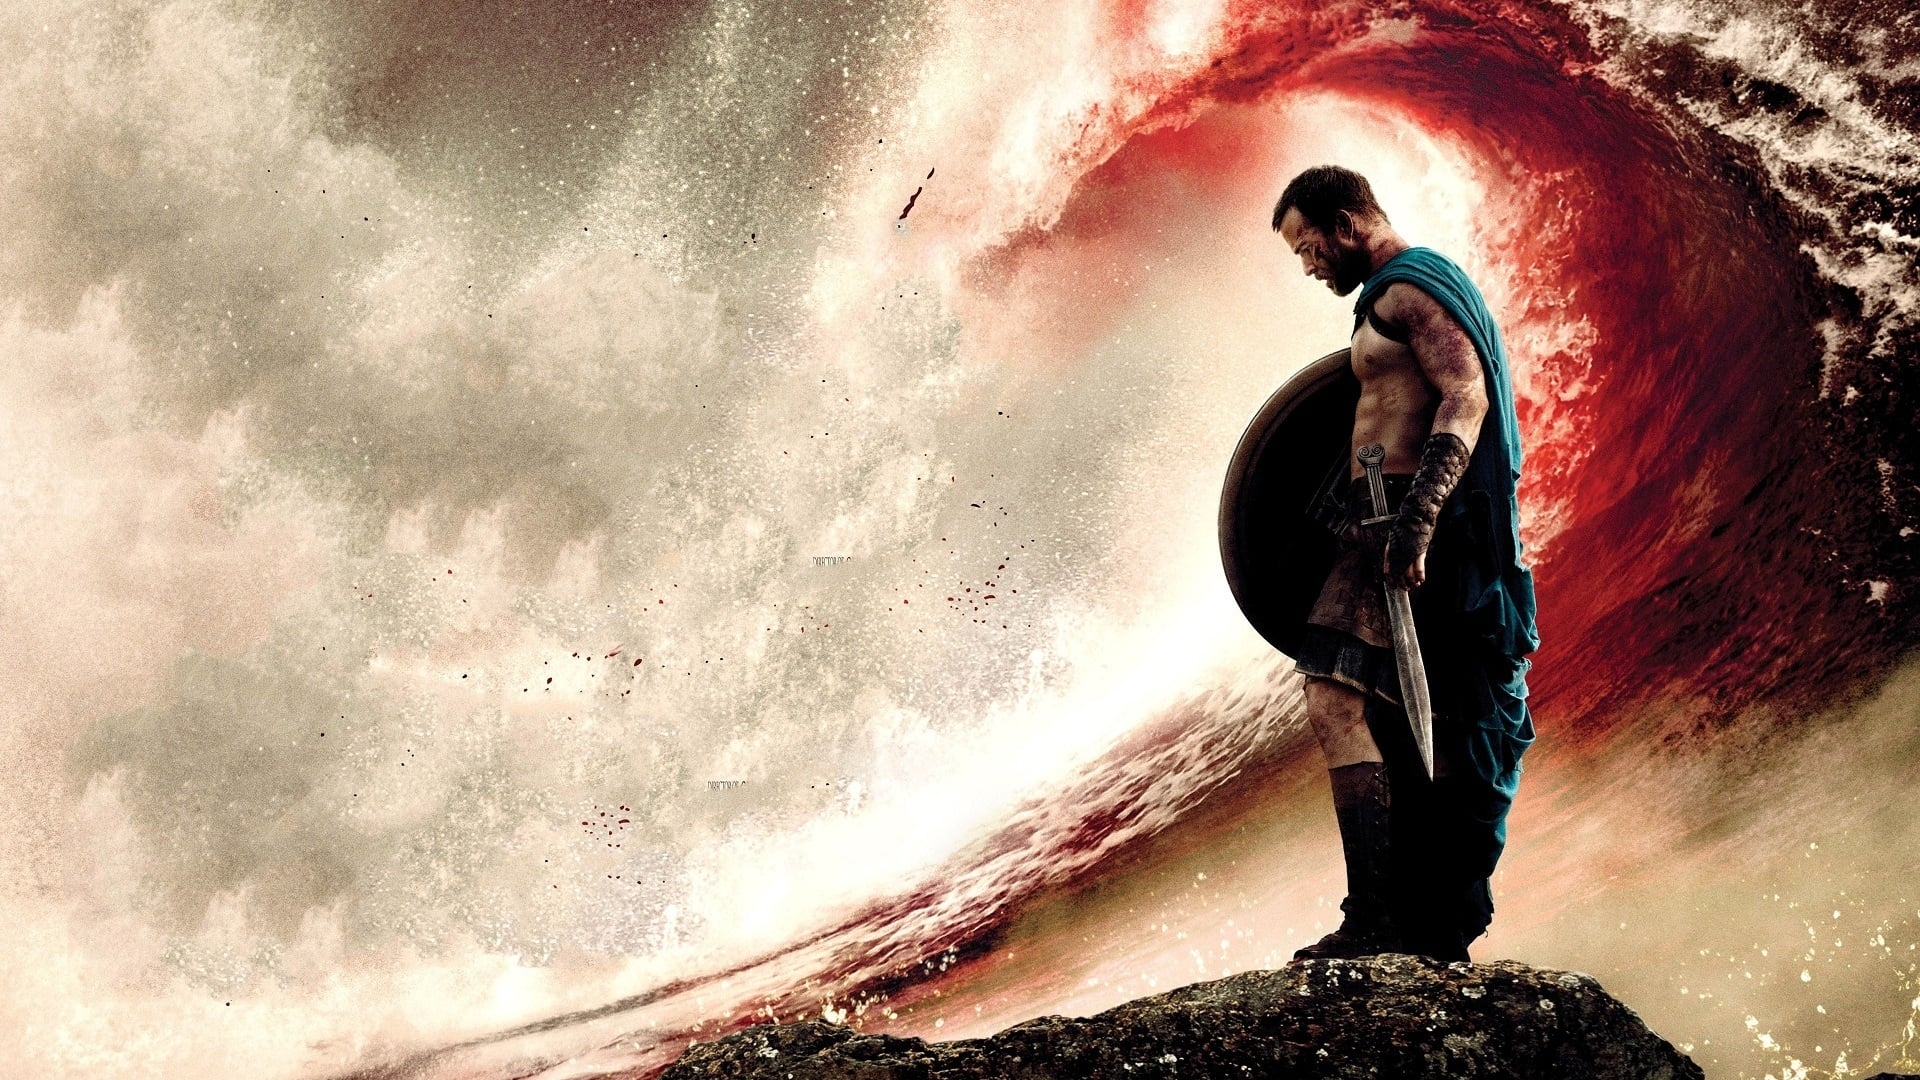 300: Rise of an Empire (300: Rise of an Empire)